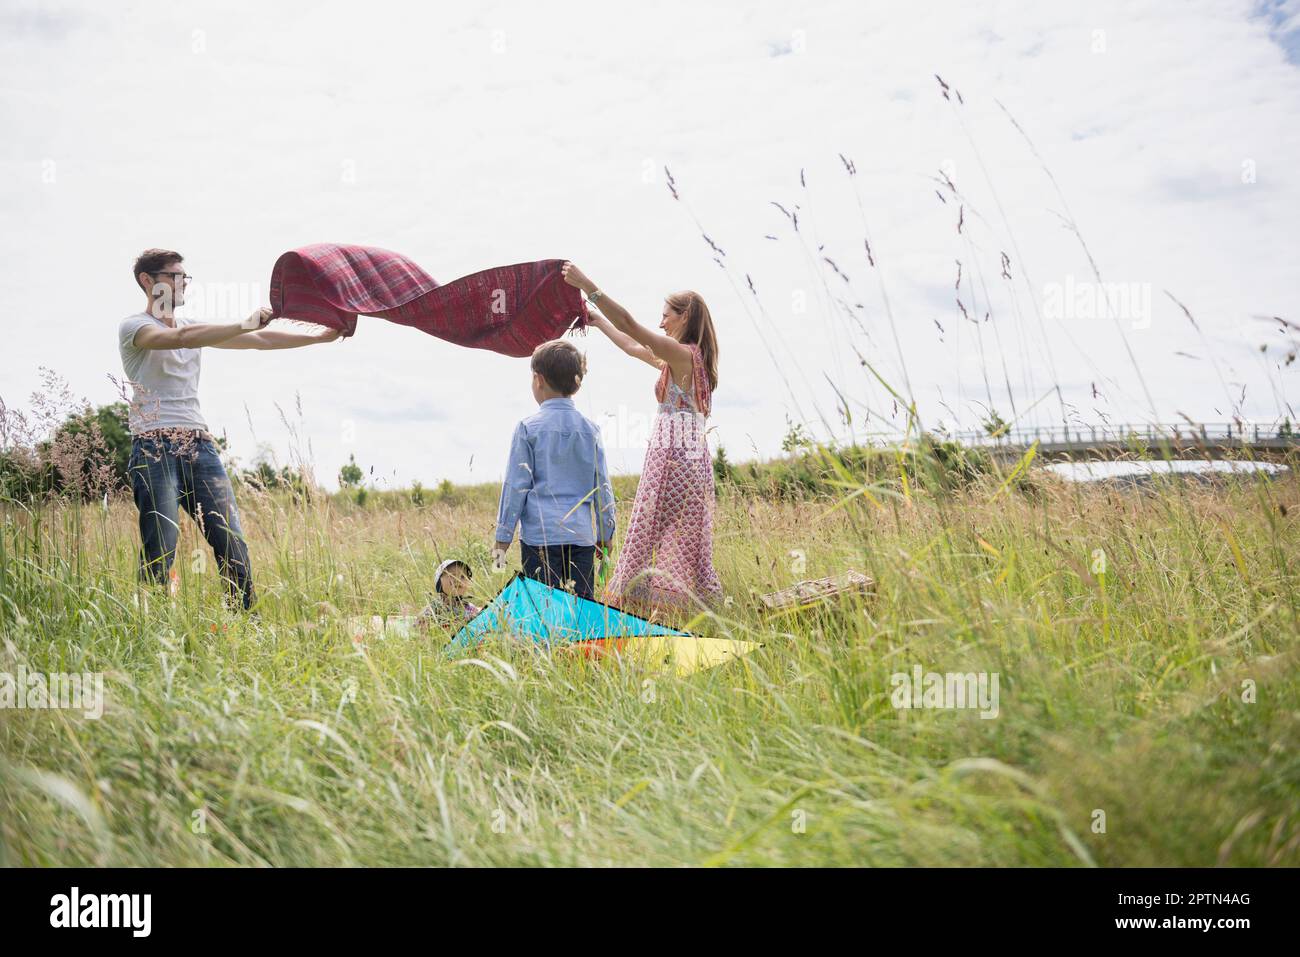 Family spreading picnic blanket on meadow in the countryside, Bavaria, Germany Stock Photo